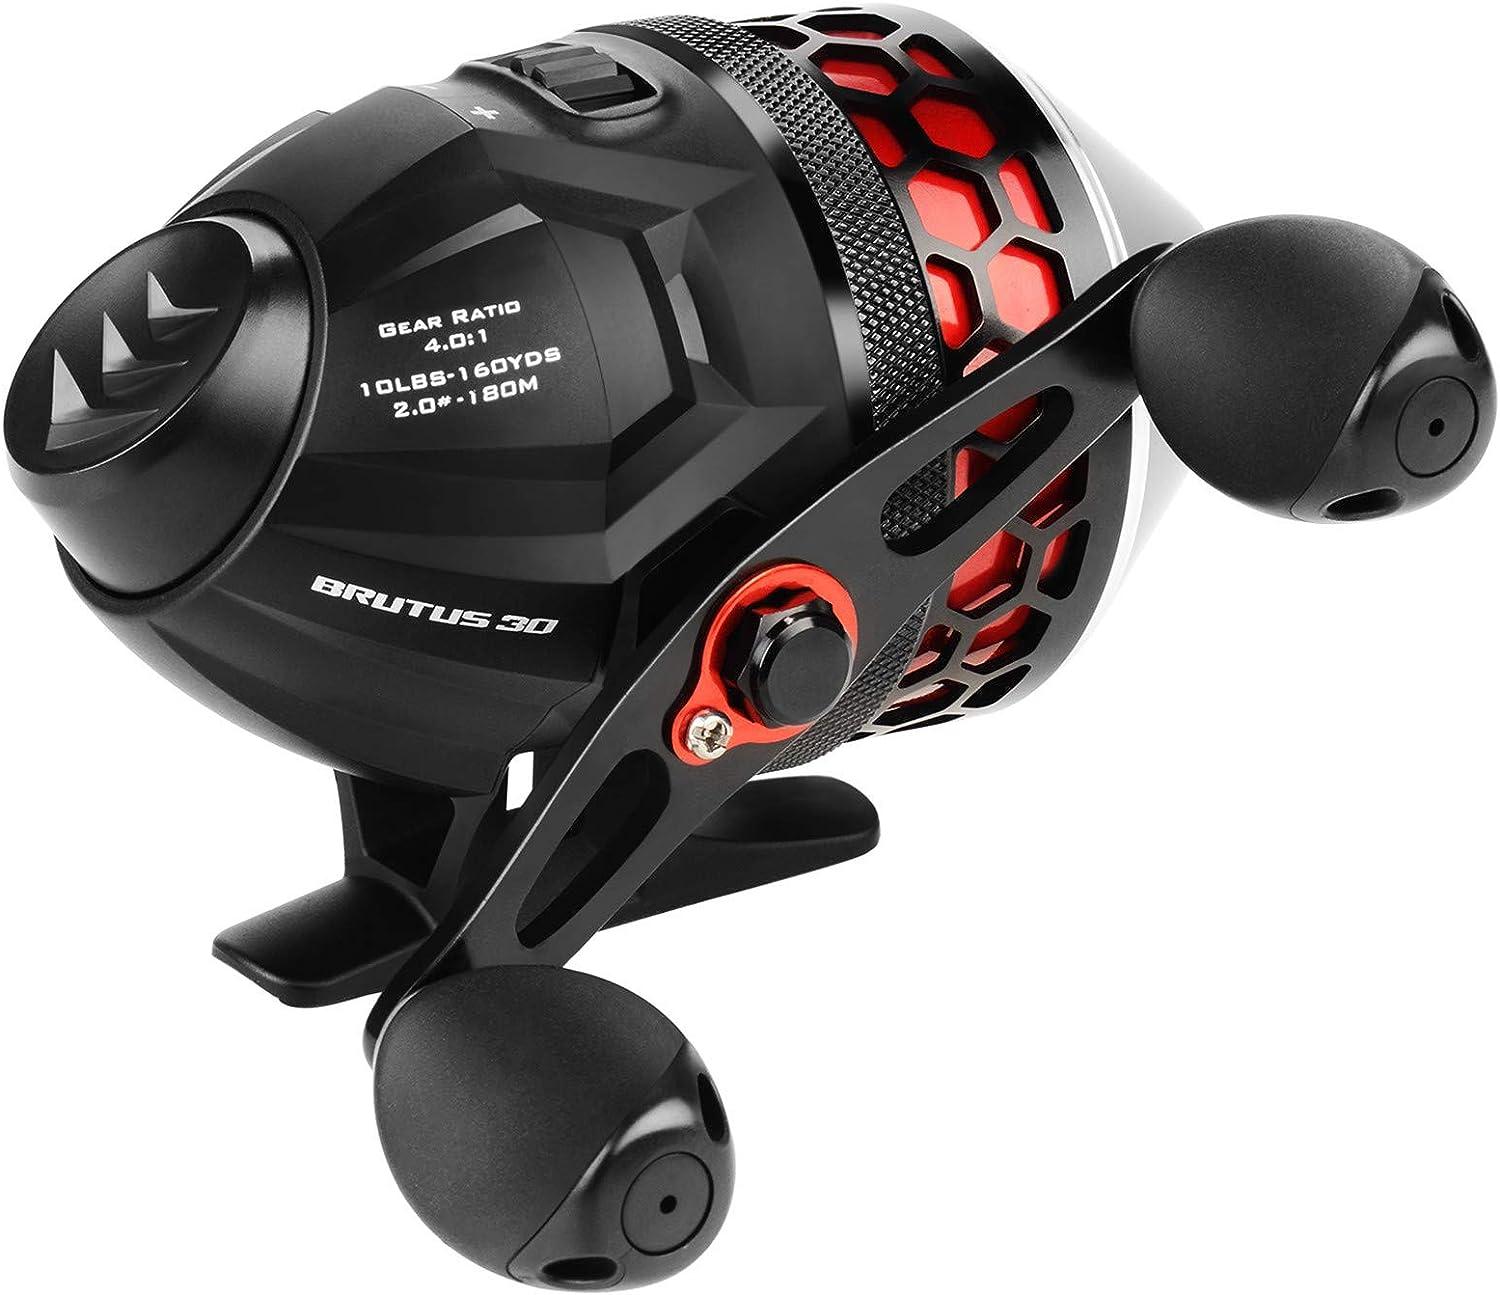 KastKing Brutus Spincast Fishing Reel,Easy to Use Push Button Casting  Design,High Speed 4.0:1 Gear Ratio,5 MaxiDur Ball Bearings, Reversible  Handle